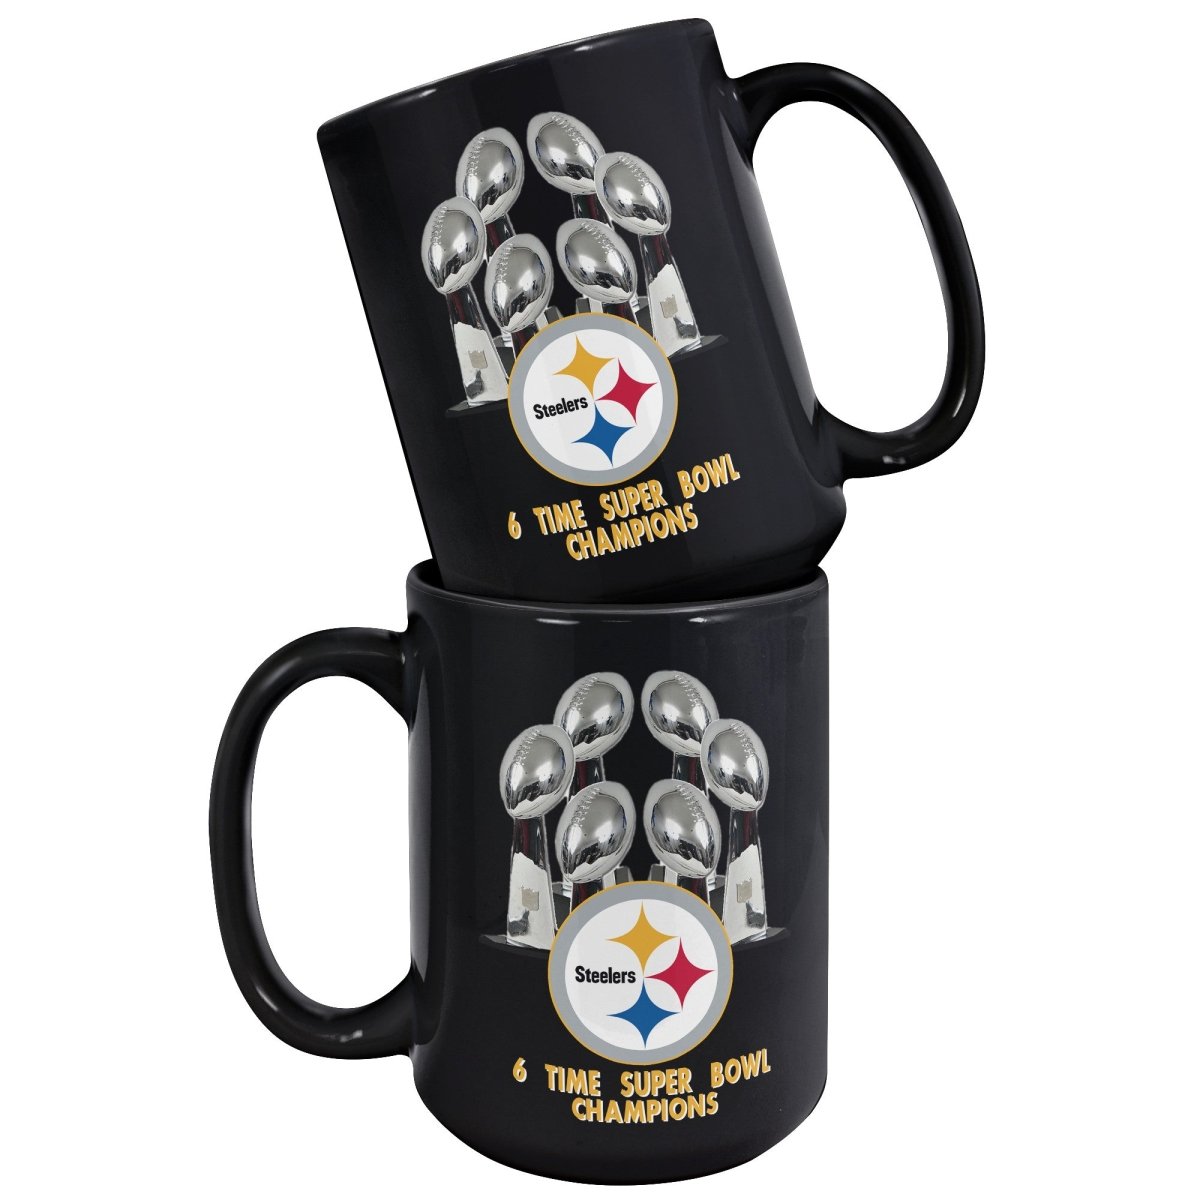 Pitsburgh 6 Time SB ChampionsCustomly Gifts